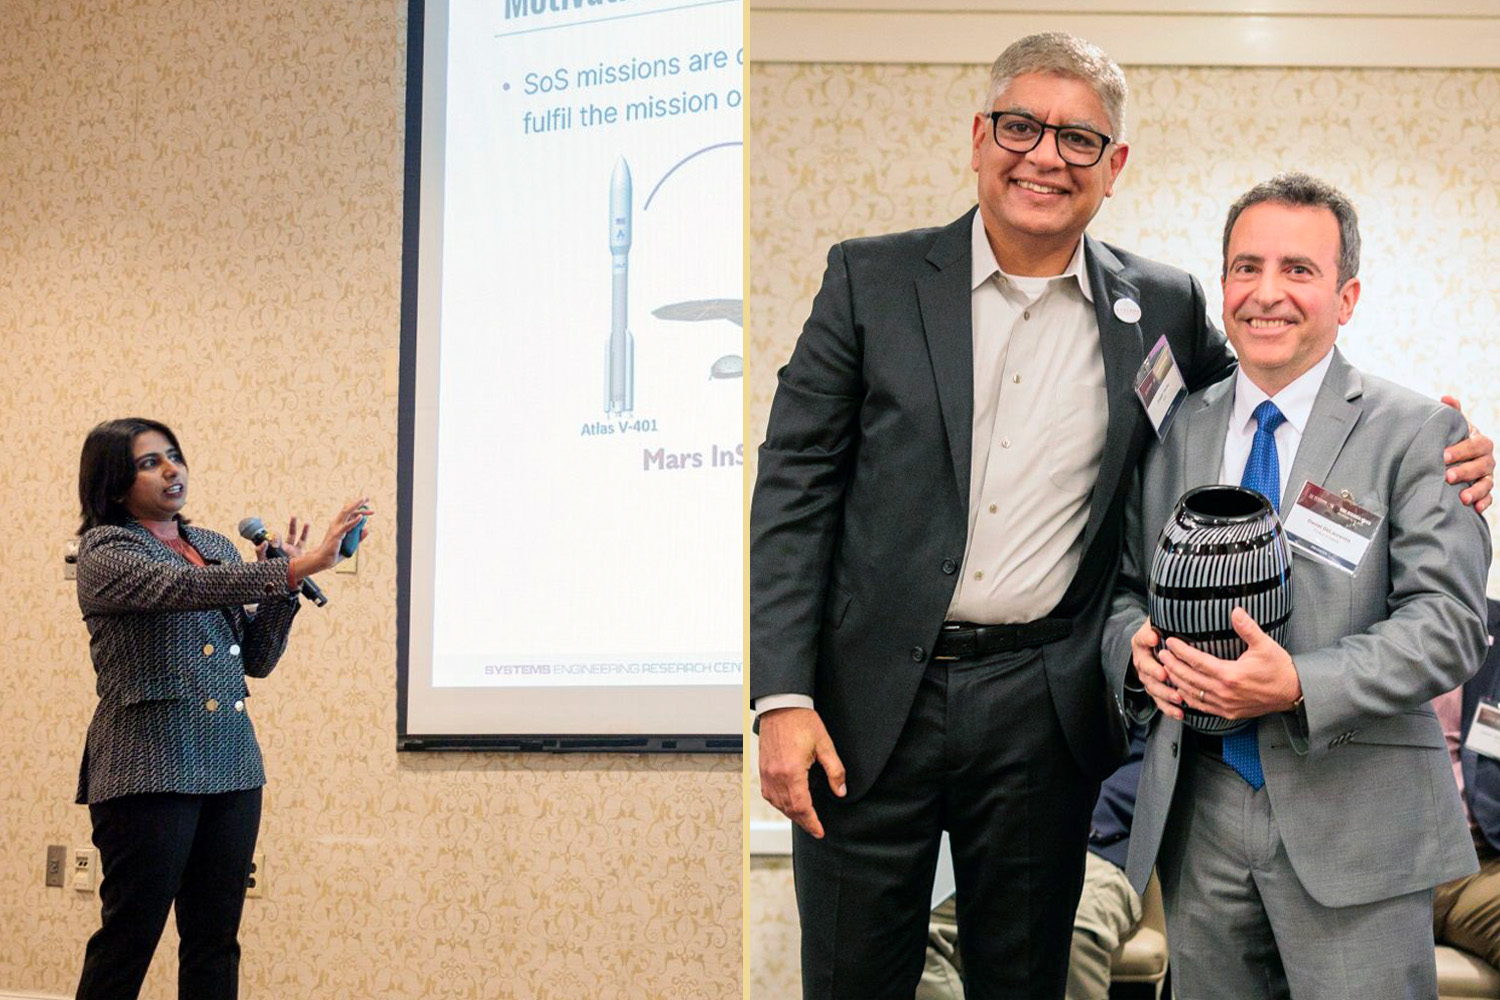 Composite of two photos, one showing Sonali Sinha Roy gesturing at a projector screen, another showing Dan DeLaurentis holding a vase-type object and standing with SERC Executive Director Dinesh Verma.